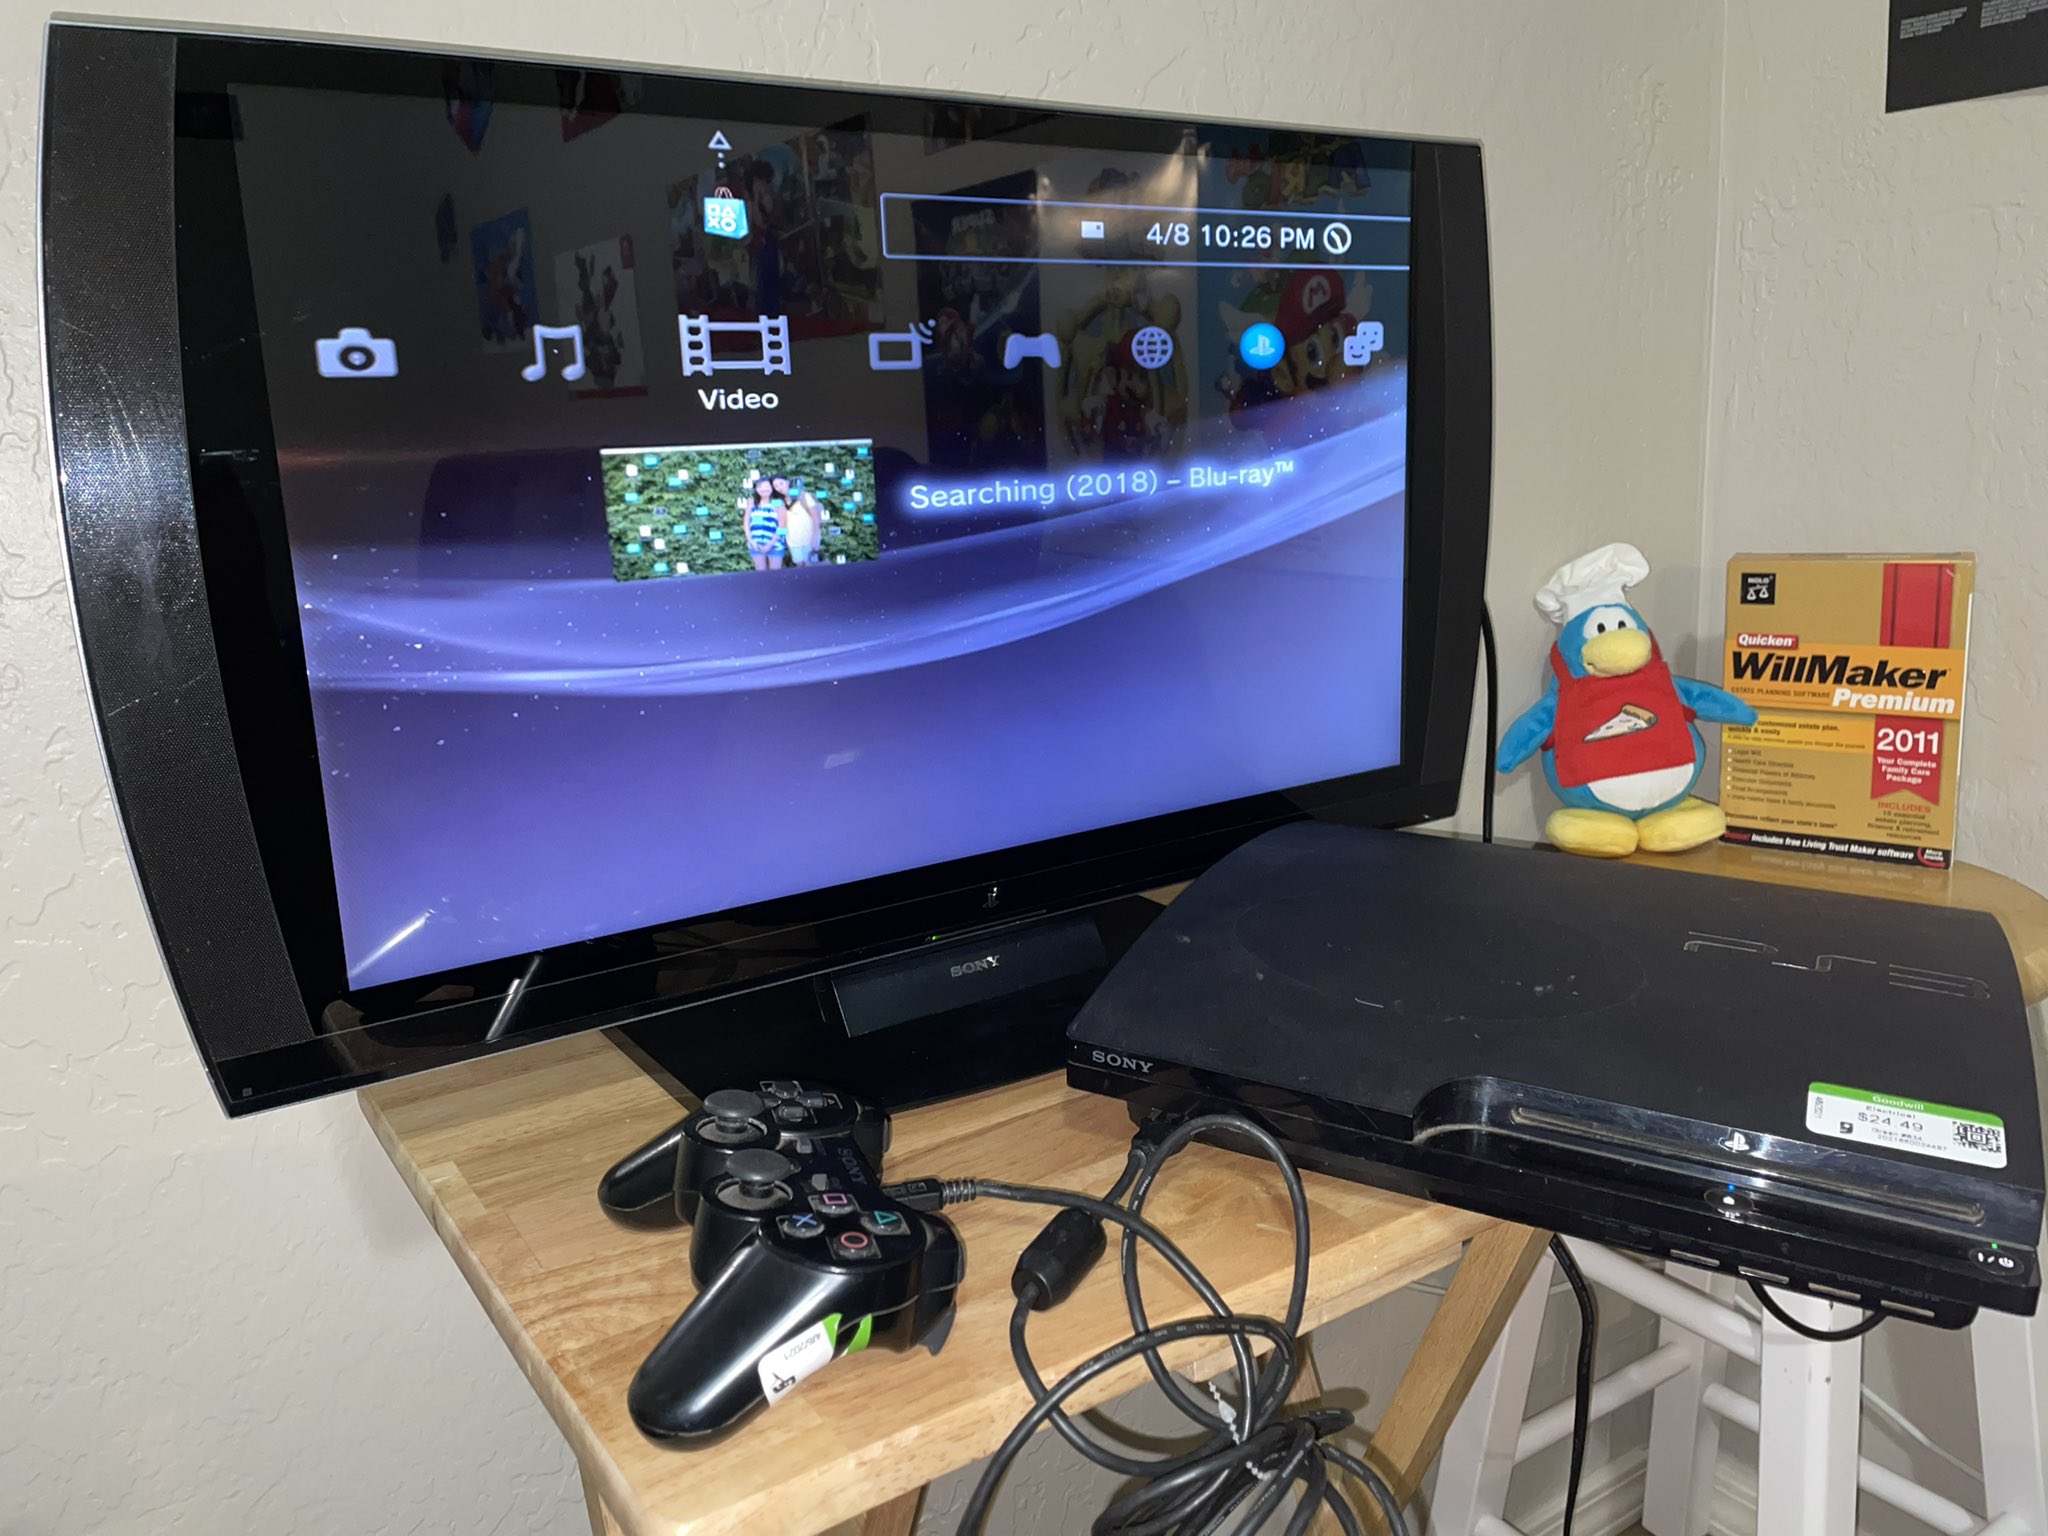 Plainrock124 on Twitter: the same day the PlayStation 3D TV ordered arrives, I find a cheap, fully working Slim to go along with it! :) https://t.co/sz6HTYU73I" / Twitter